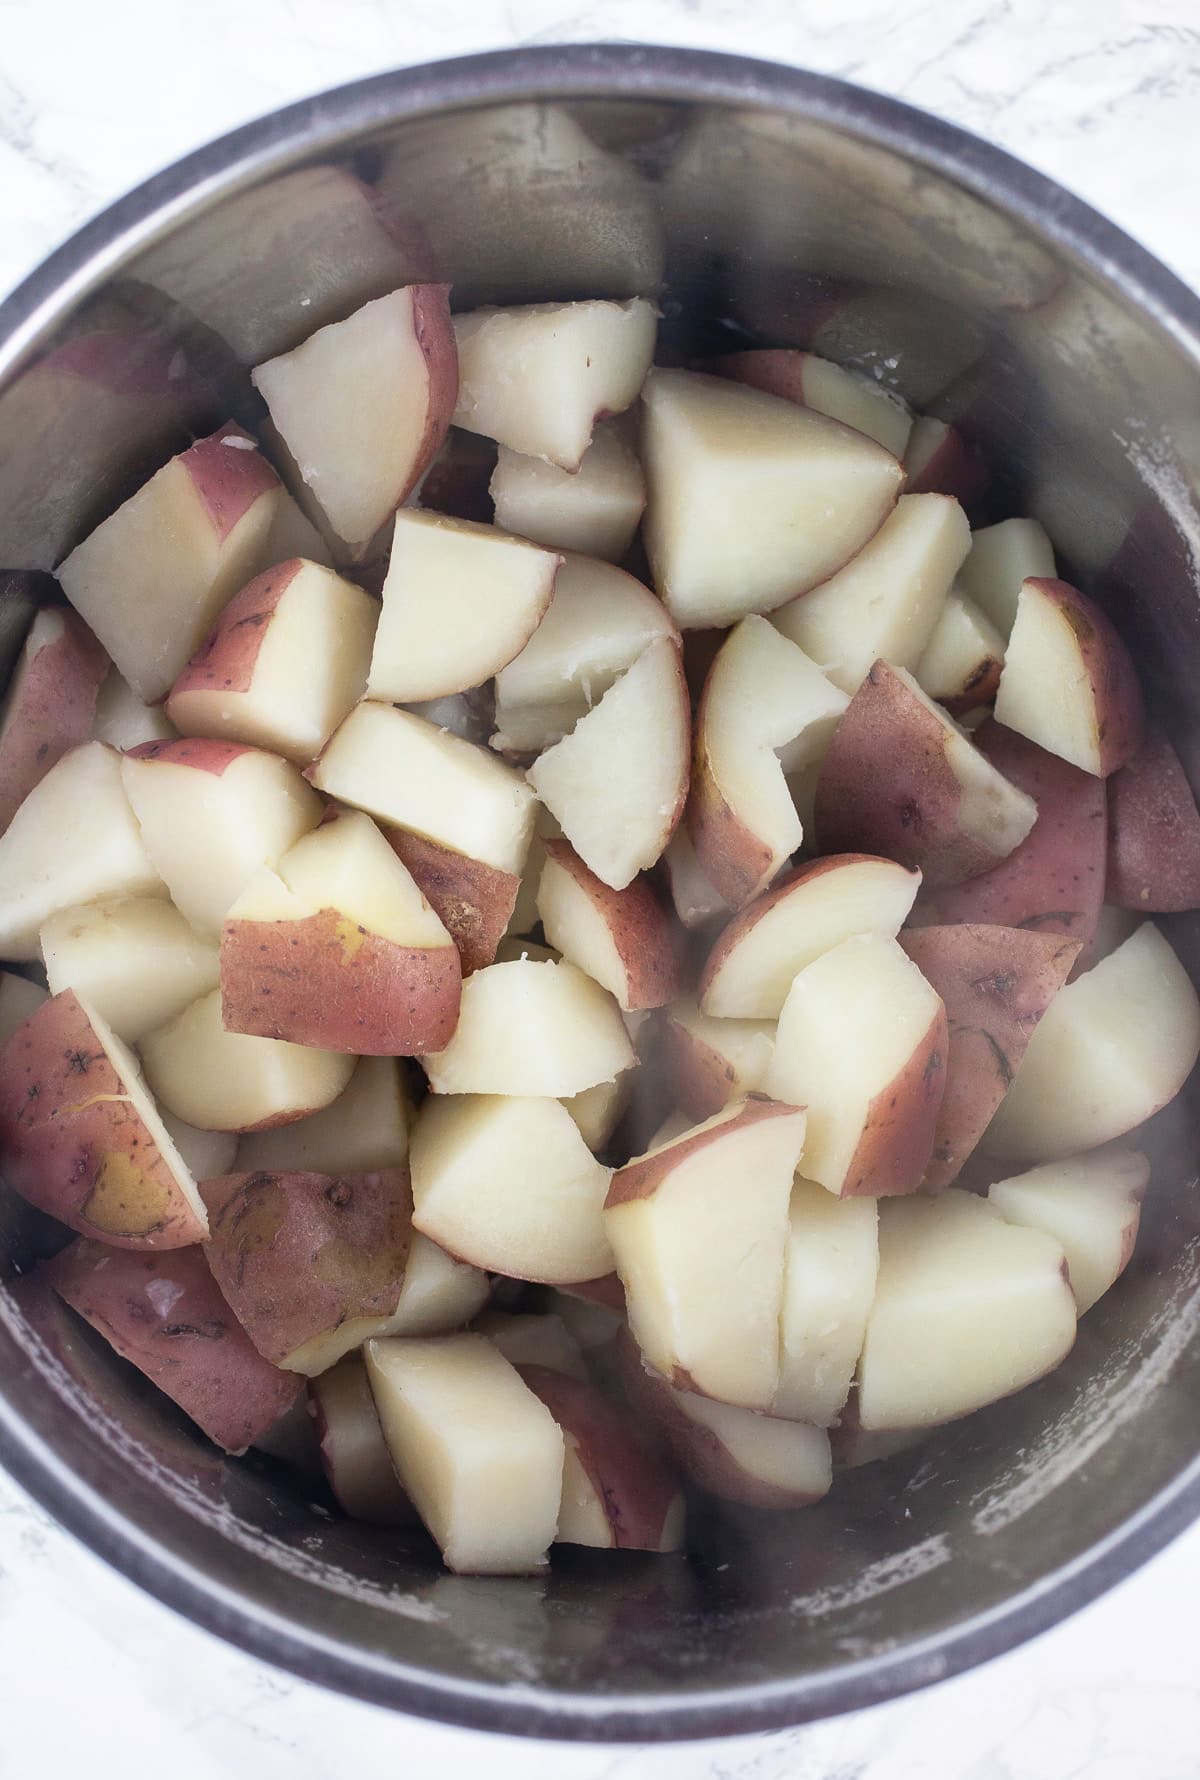 Cooked diced red potatoes in metal pot.